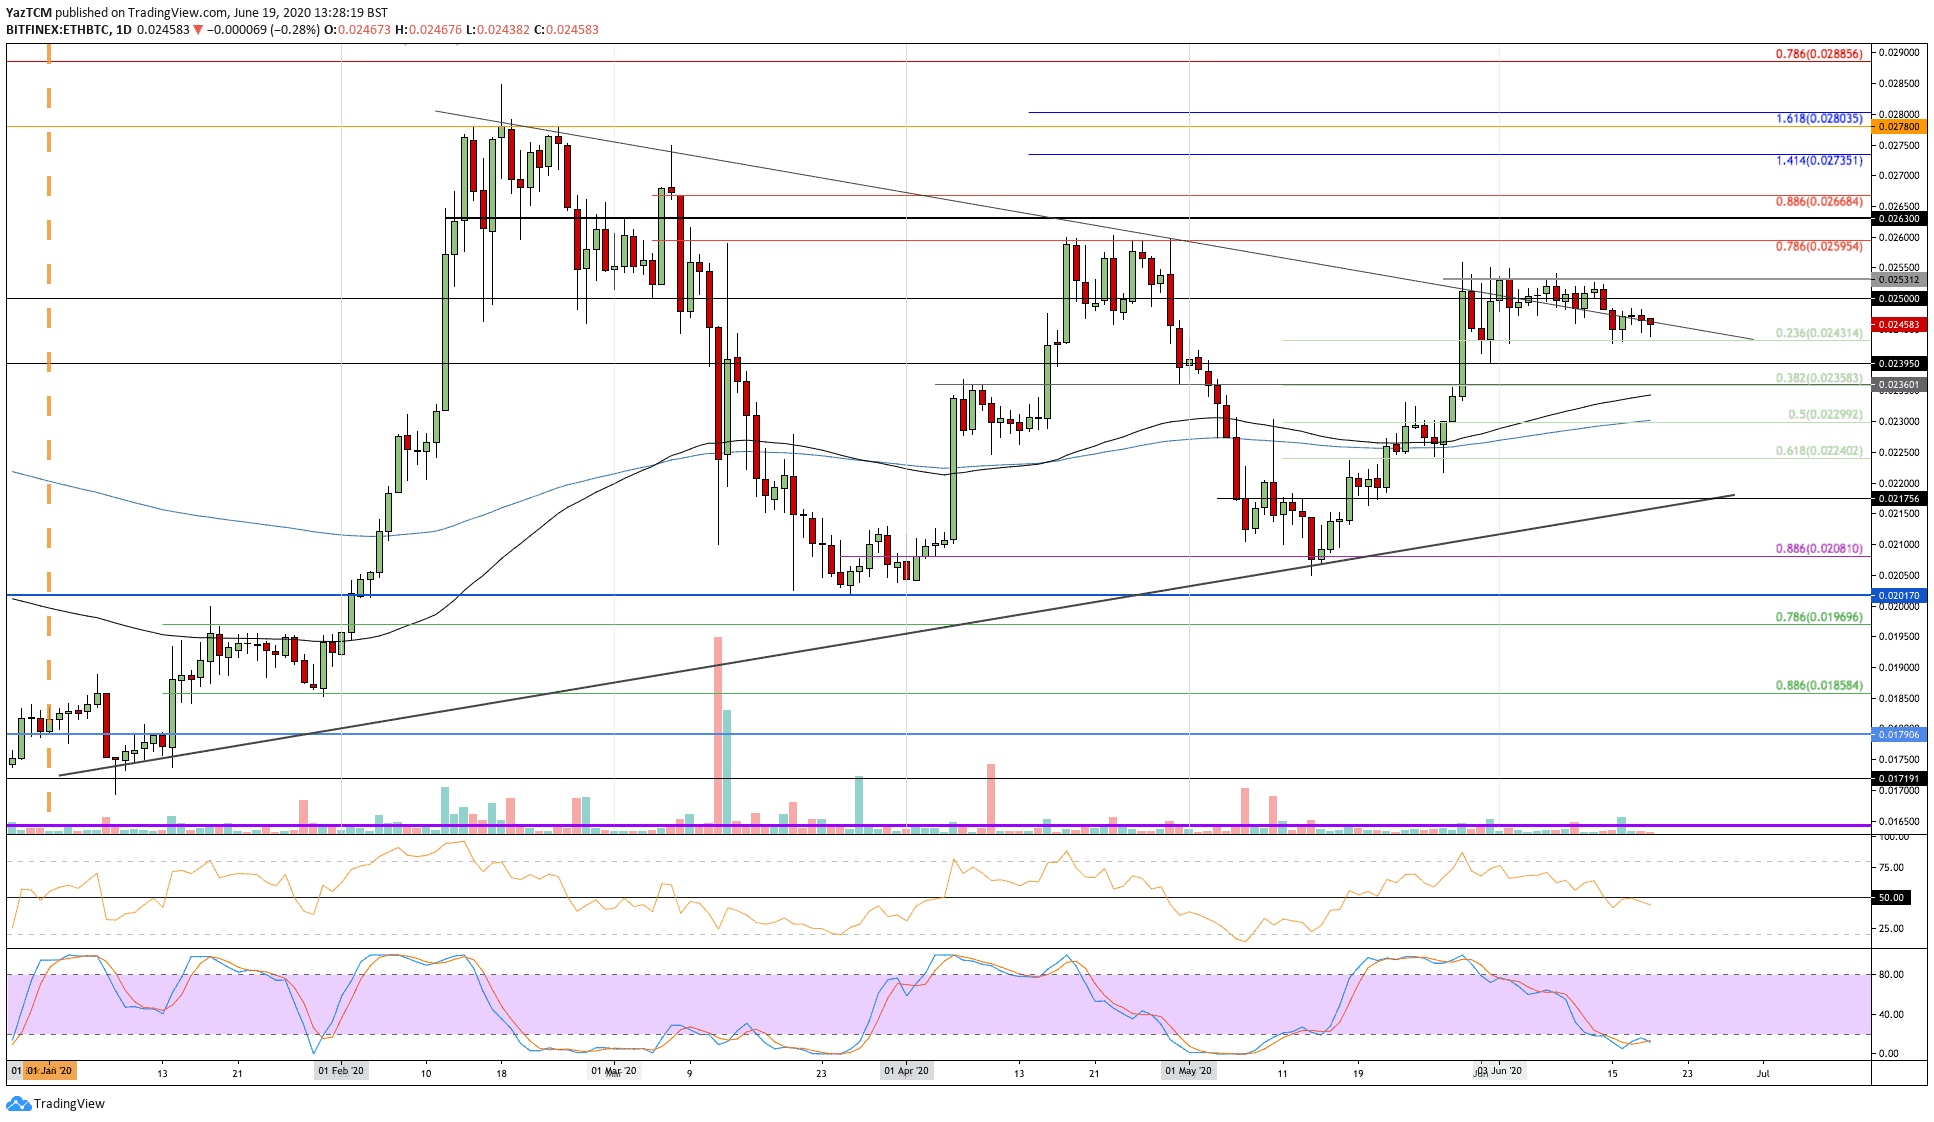 Crypto Price Analysis & Overview June 19th: Bitcoin, Ethereum, Ripple, Crypto.com, and Stellar